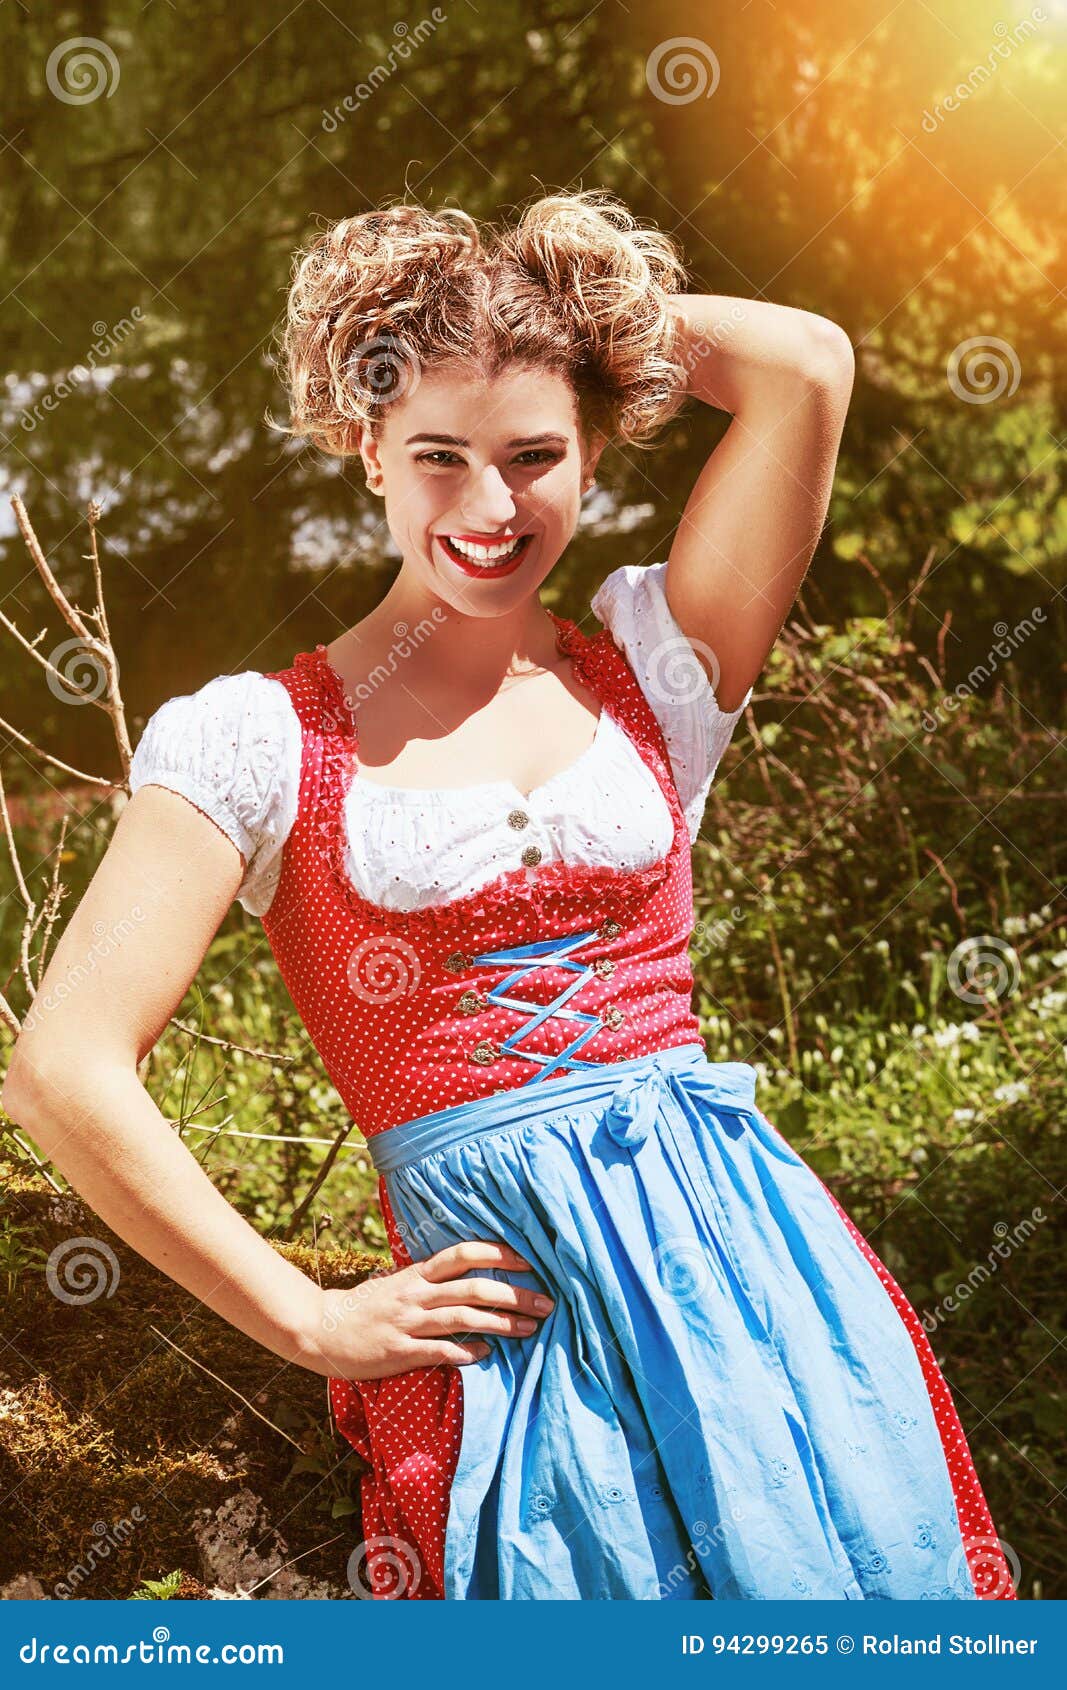 Cheerful Young Woman in Dirndl Stock Image - Image of flower, munich ...